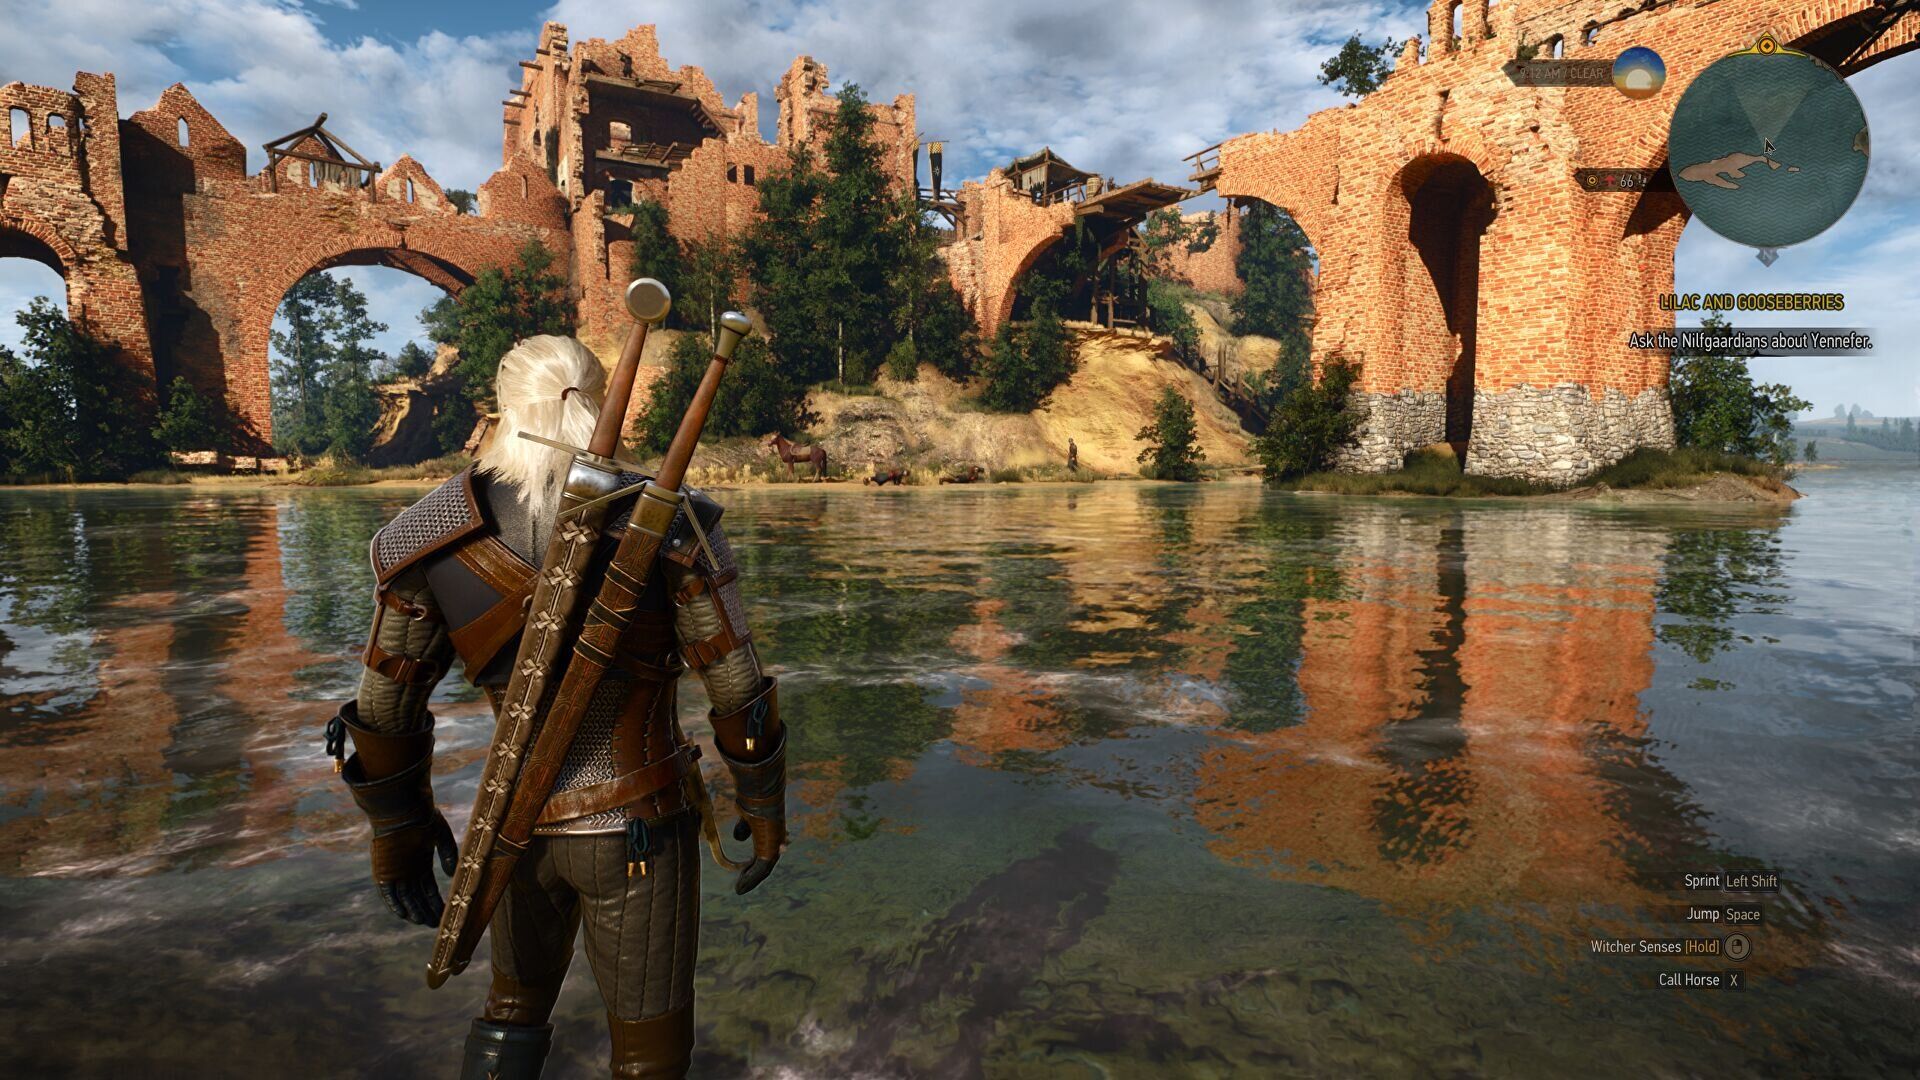 The Witcher 3 PS5 Release Date – Next Gen Witcher Version Coming